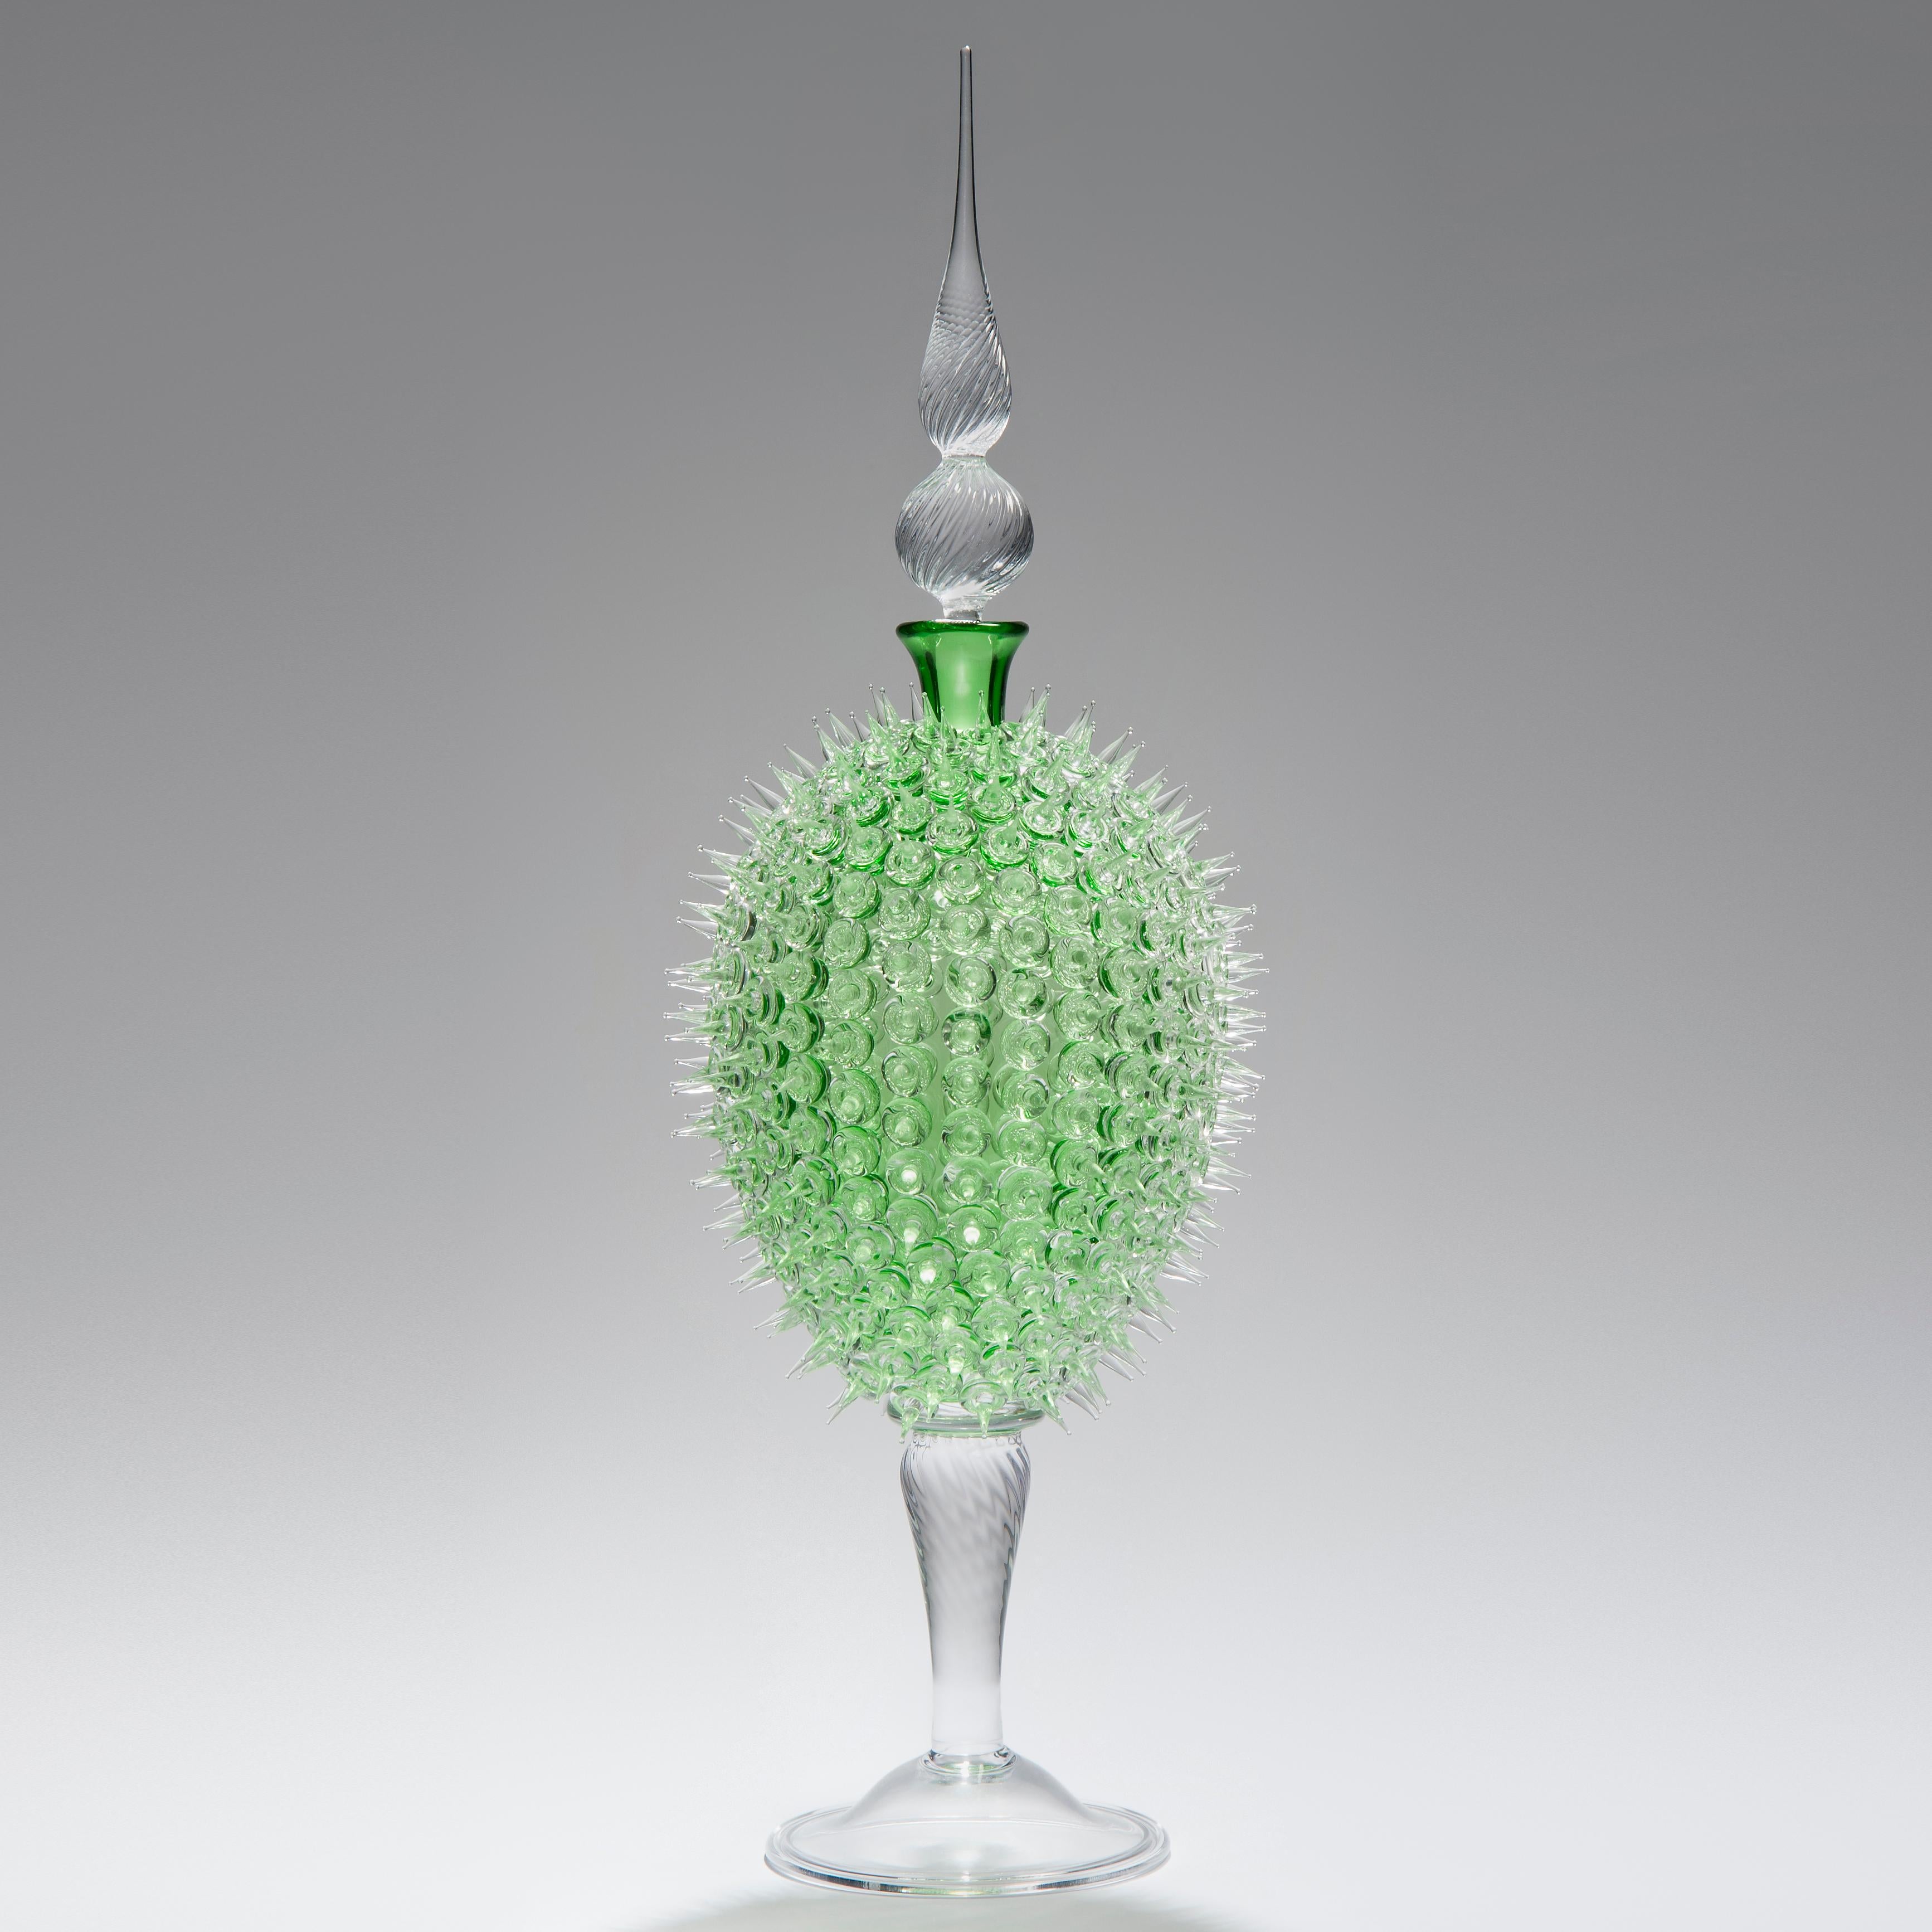 Acanthus Veronese in Green, is a unique art glass jar by British glass artist James Lethbridge. Blown glass with the outer layer covered in flameworked decoration and adornment. With removable decorative glass stopper.

Initially following a